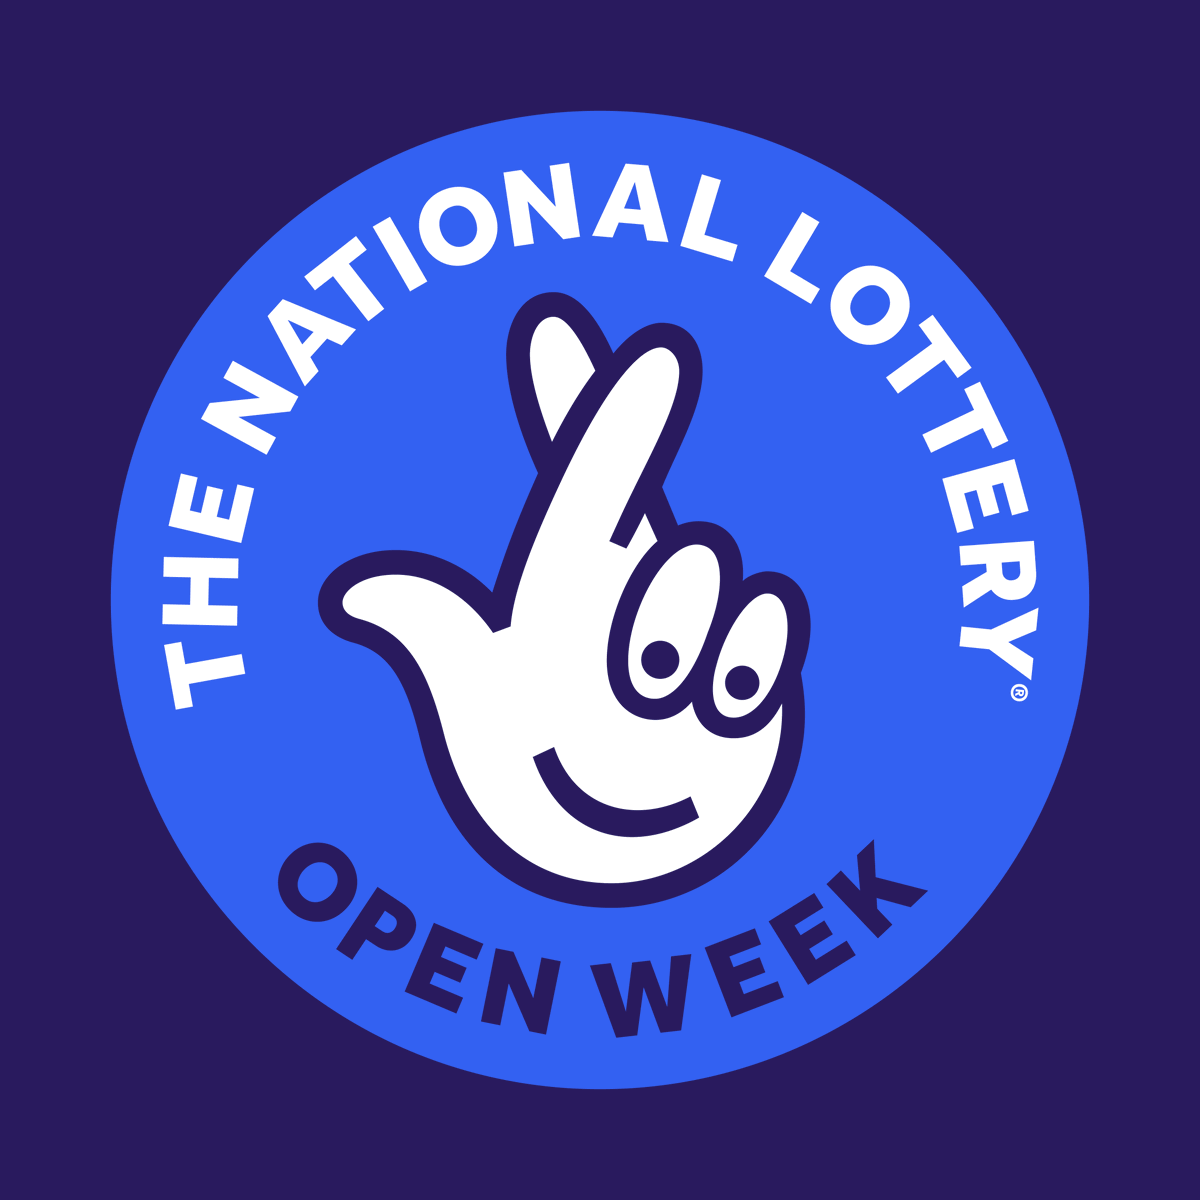 We're pleased to be taking part in the #NationalLotteryOpenWeek and saying #ThanksToYou for playing the #lottery and your support in making some of the work we do possible. Please show a lottery ticket/scratchcard for free entry on 10-13 June. canalrivertrust.org.uk/enjoy-the-wate…